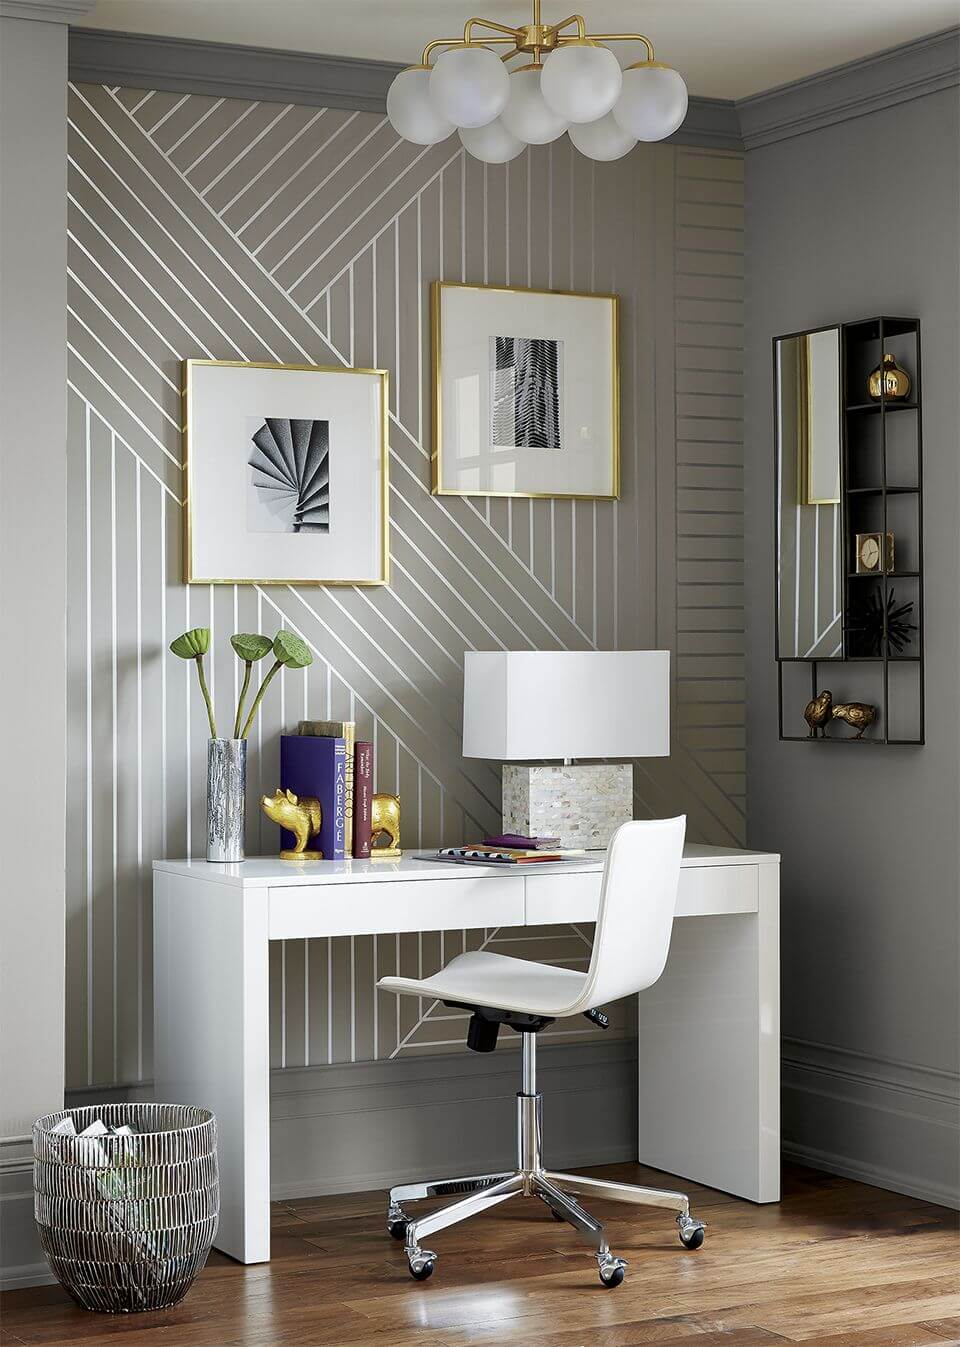 How to Paint Stripes on a Wall Without Tape 